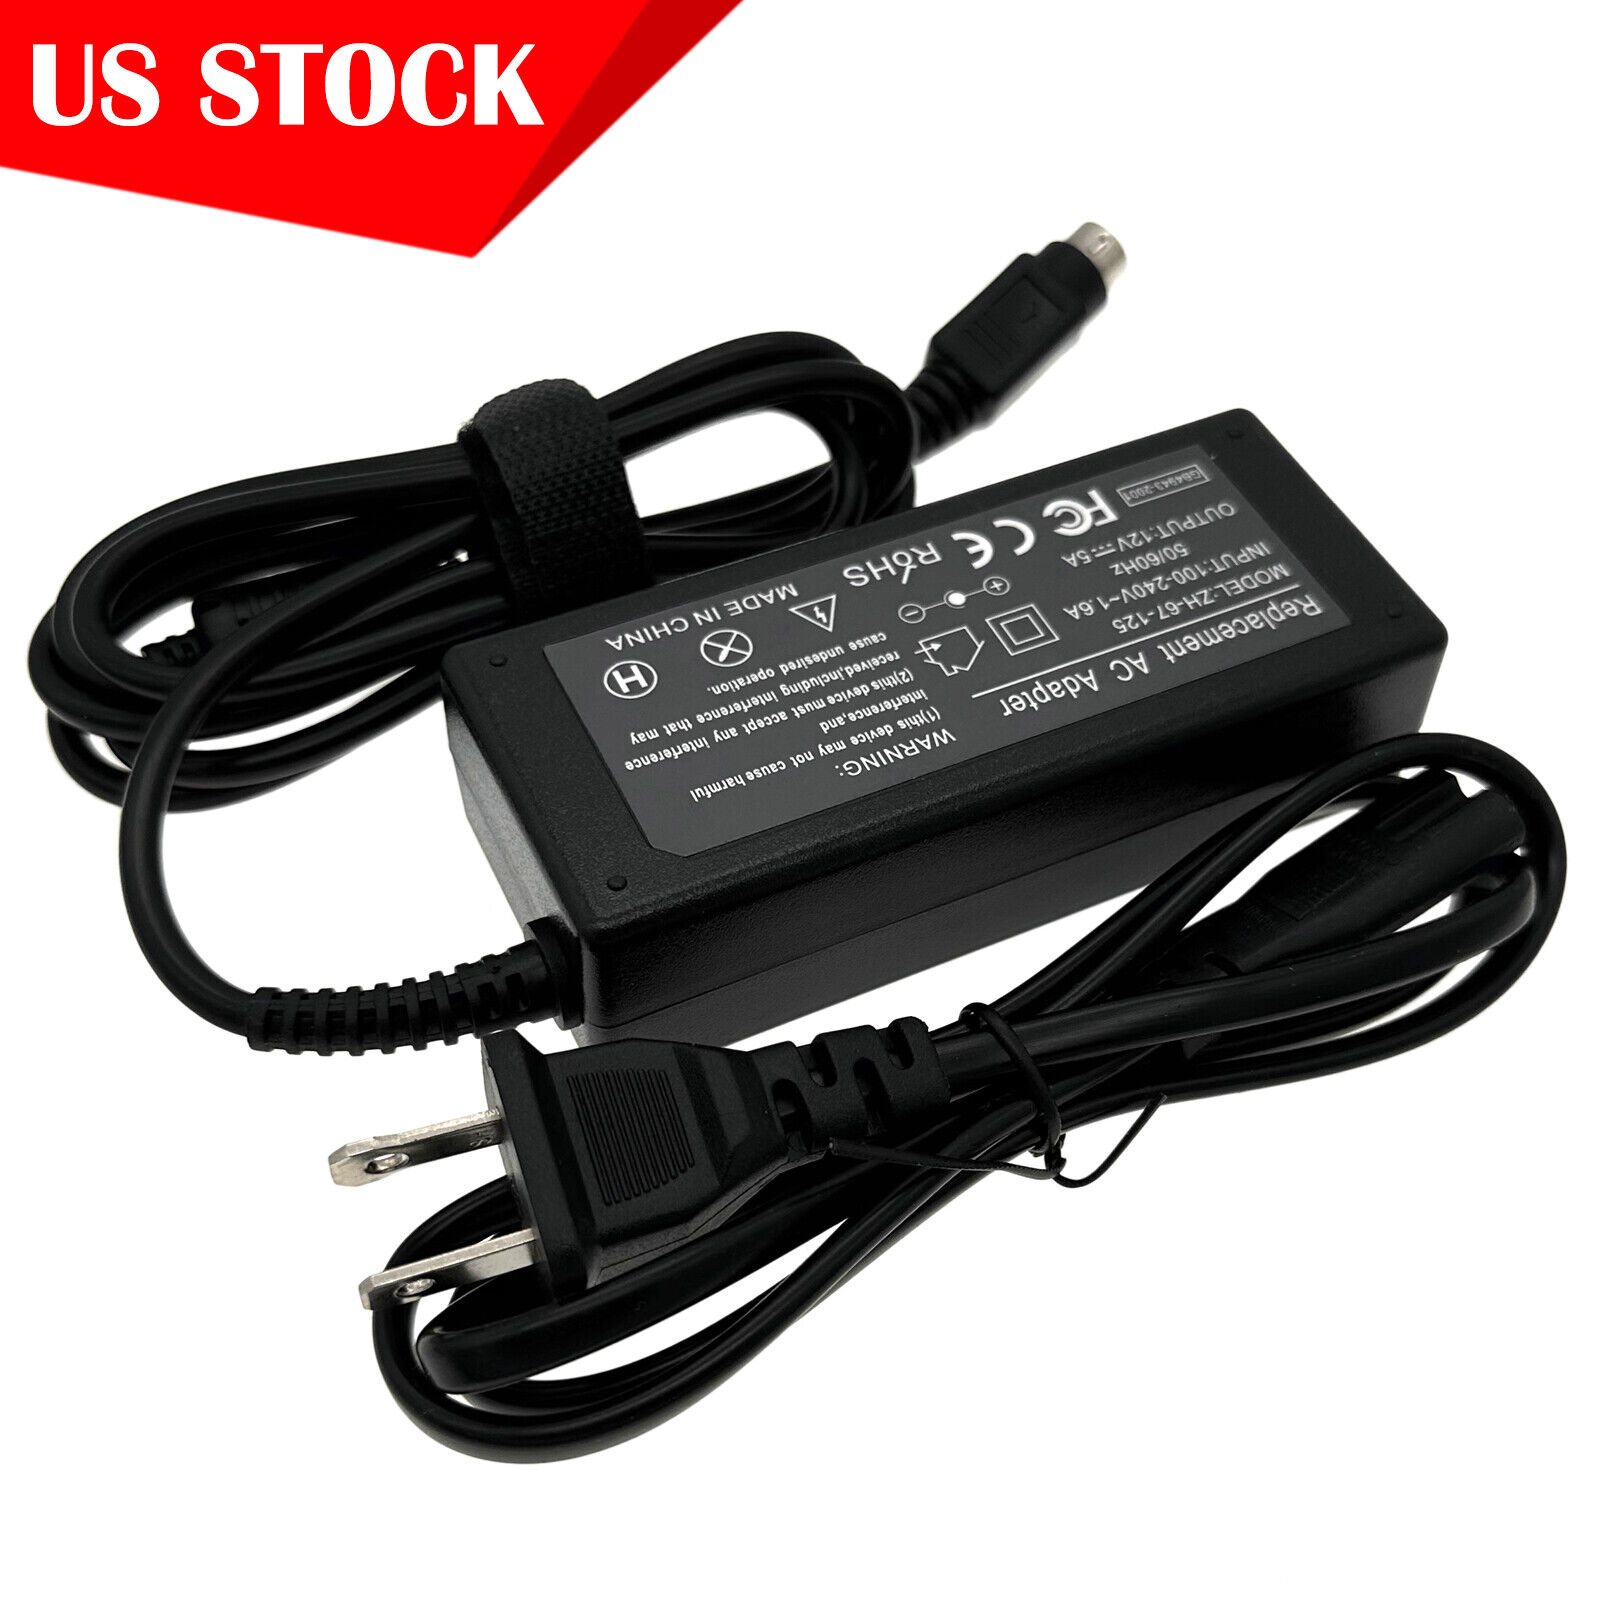 12V 4-Pin DIN AC Power Adapter Charger for Sanyo CLT1554 CLT2054 LCD TV Monitor Brand Unbranded/Generic Bundled Items P